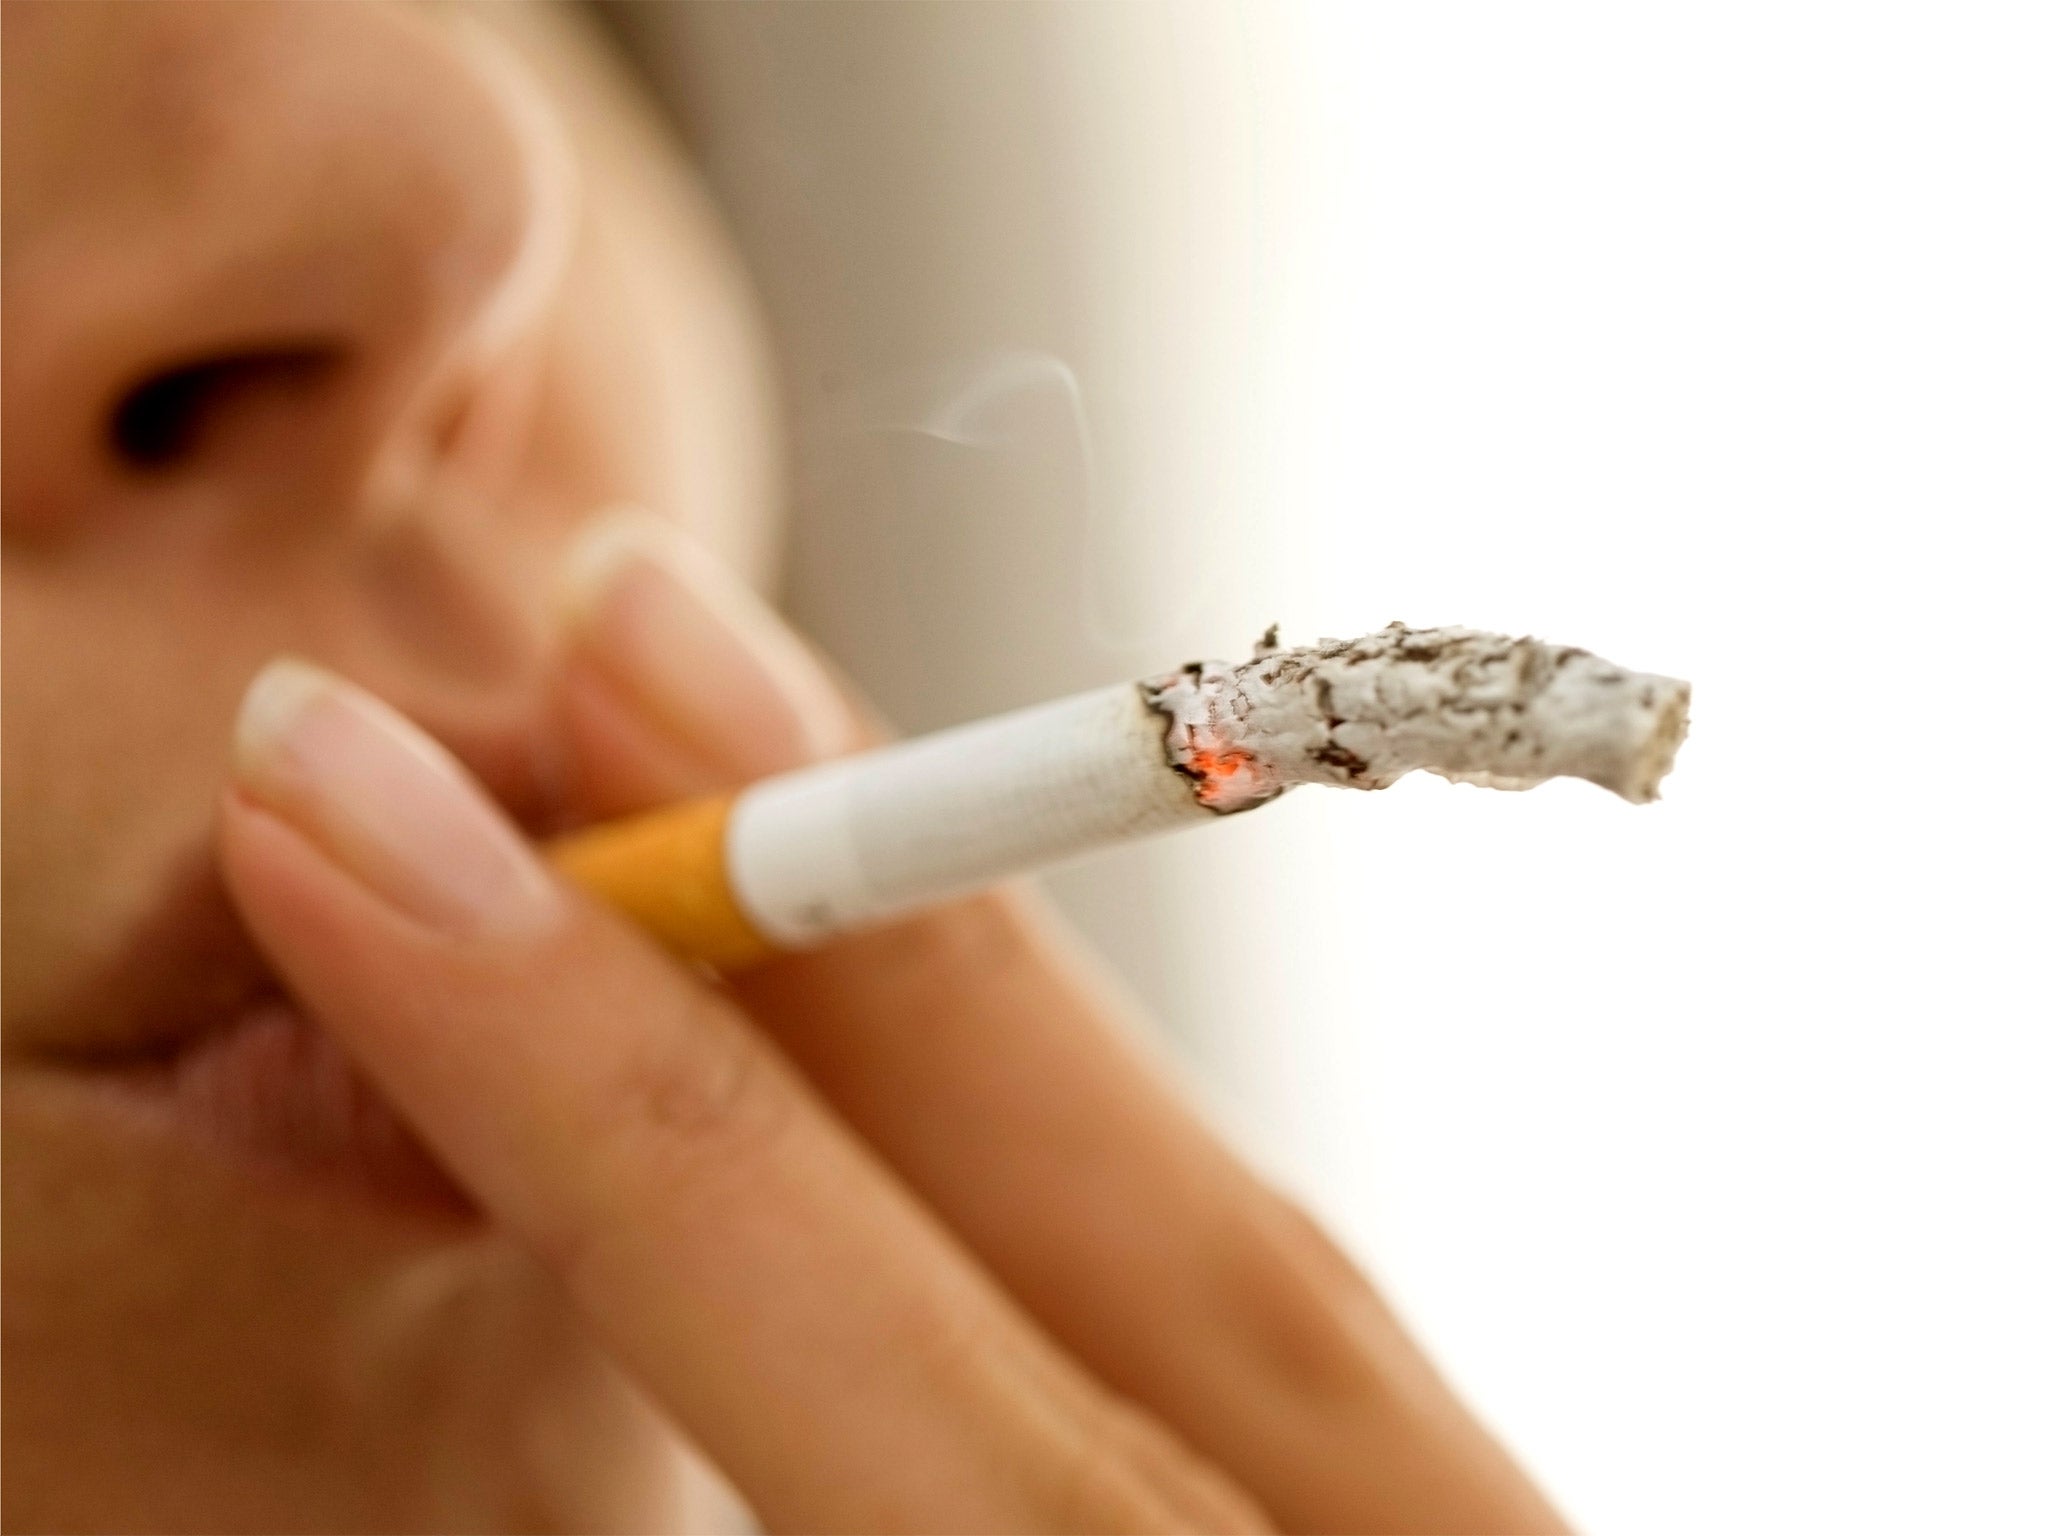 There has been a 71 per cent rise in the rates of mouth cancer among women, often linked to smoking